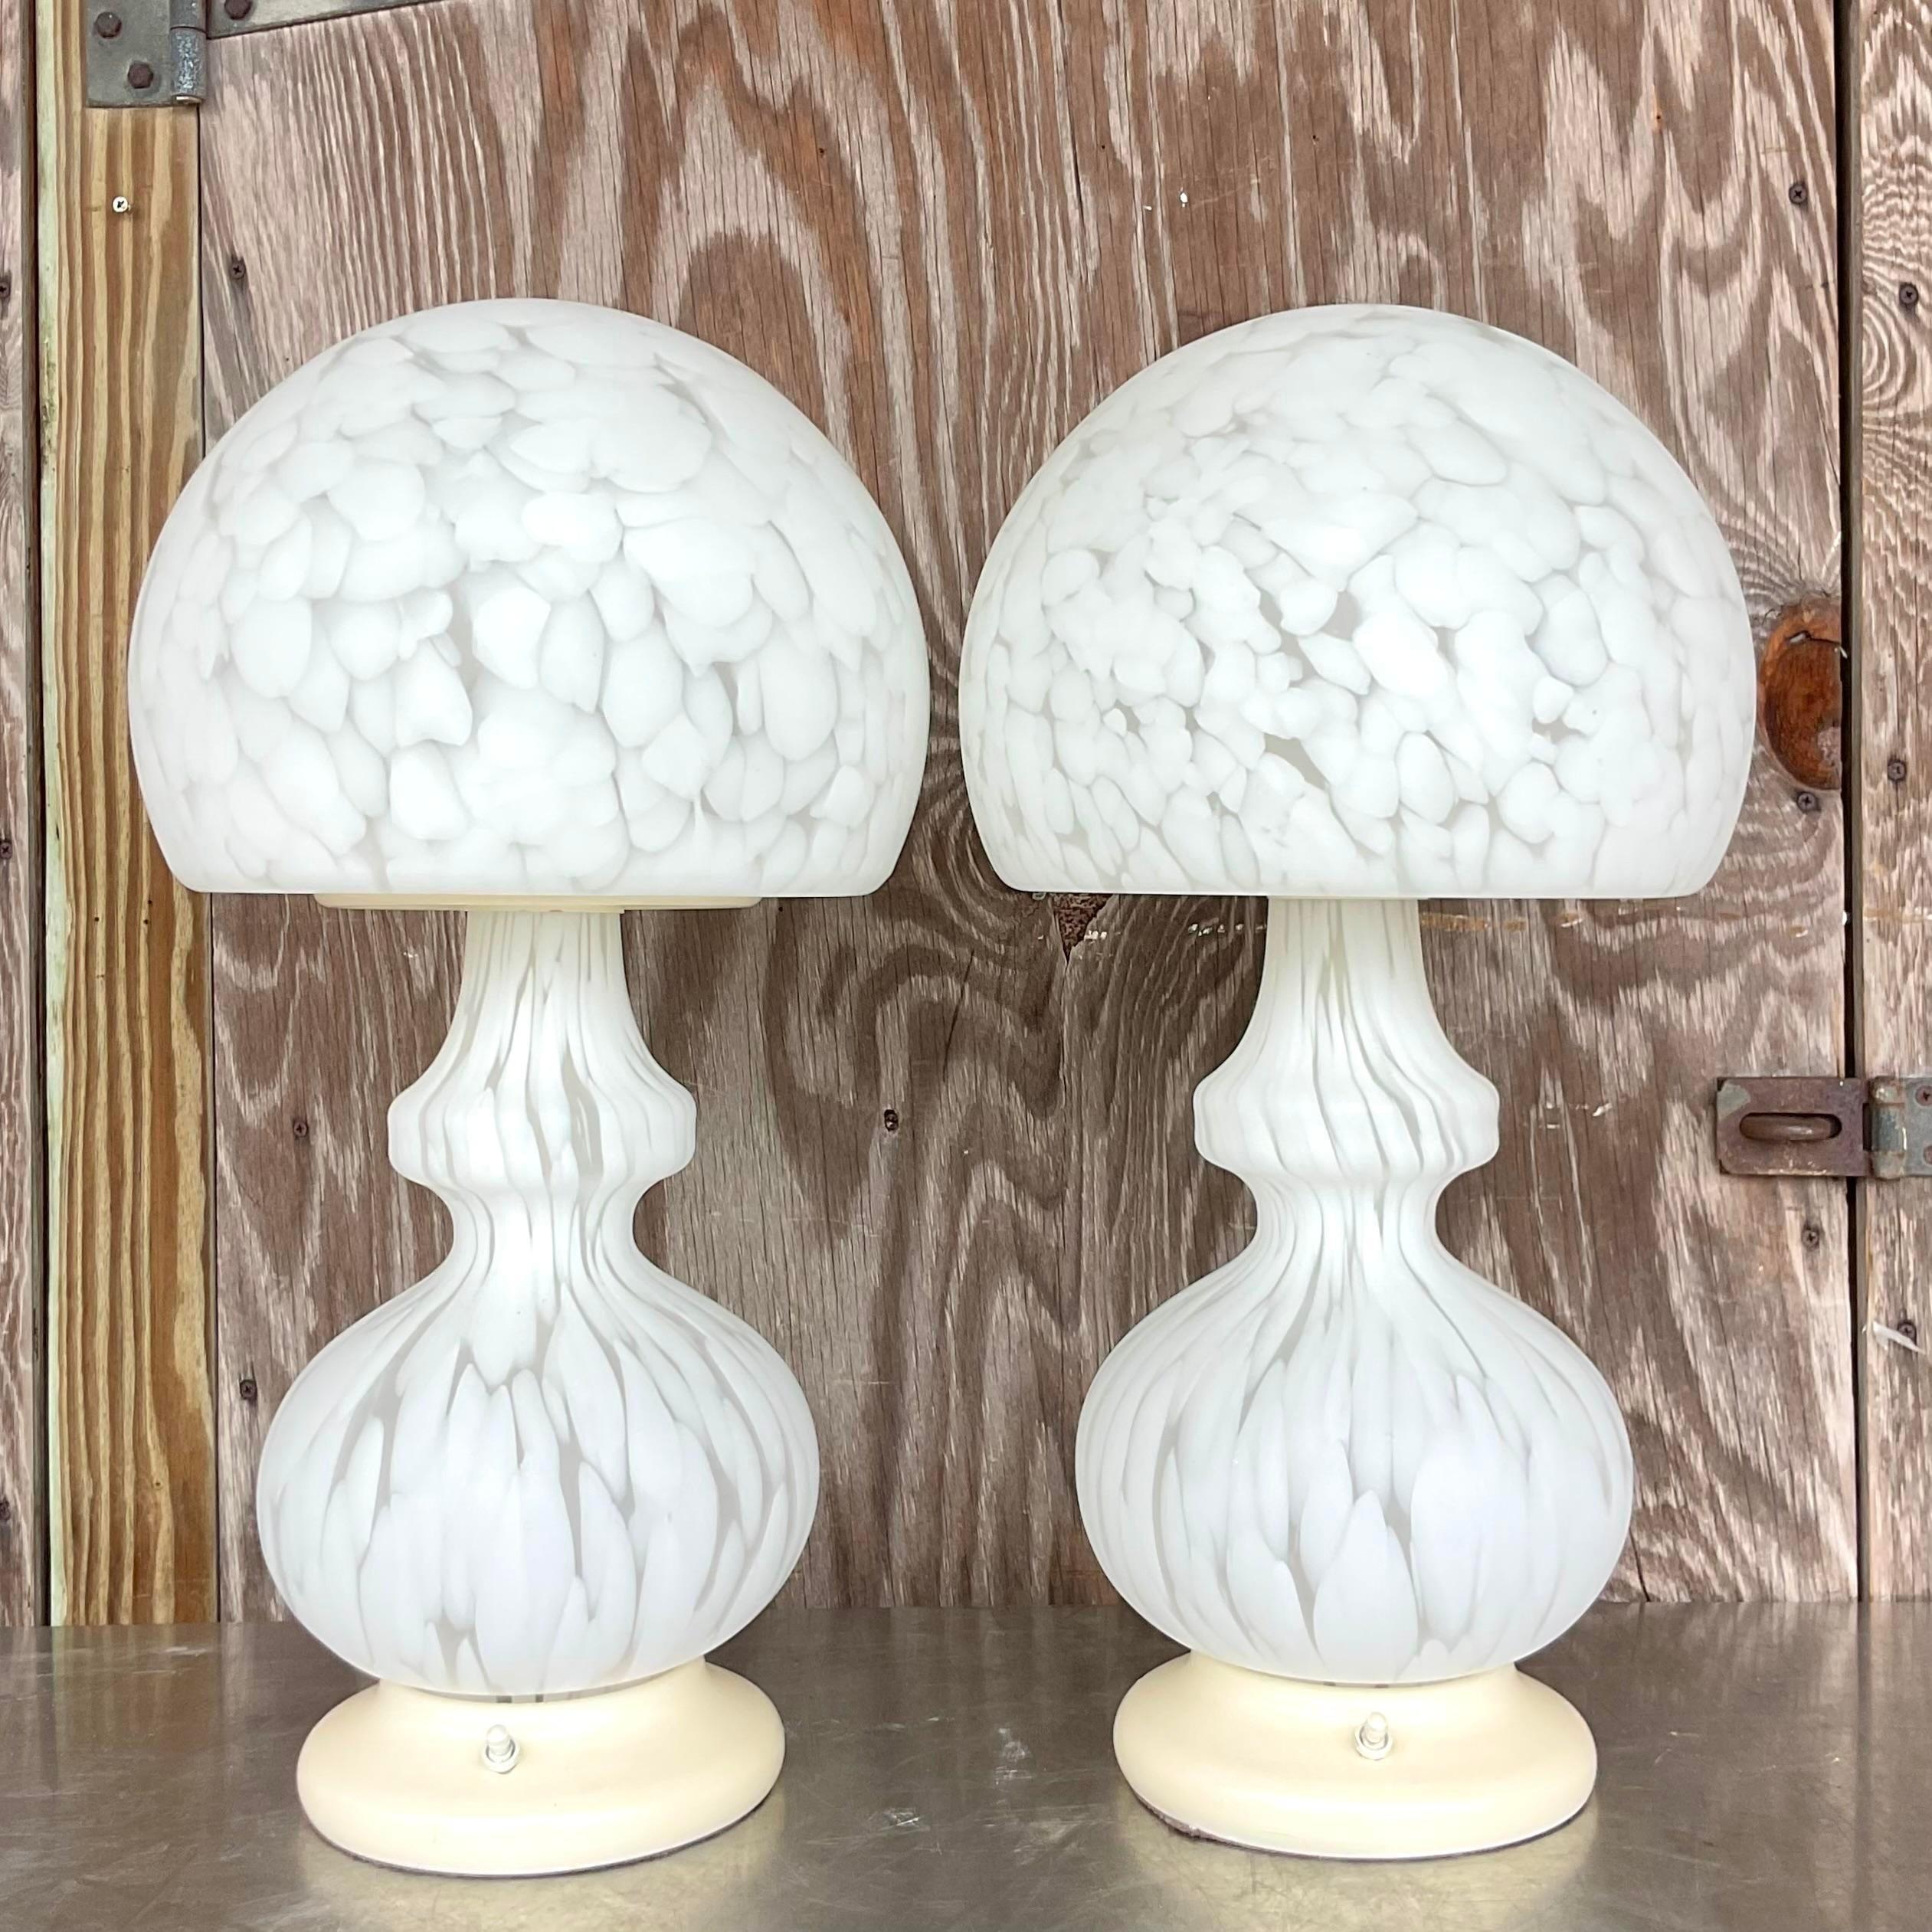 Mid-Century Modern Vintage Globe Lamps After Murano for Someroso for Laurel Lighting - a Pair For Sale